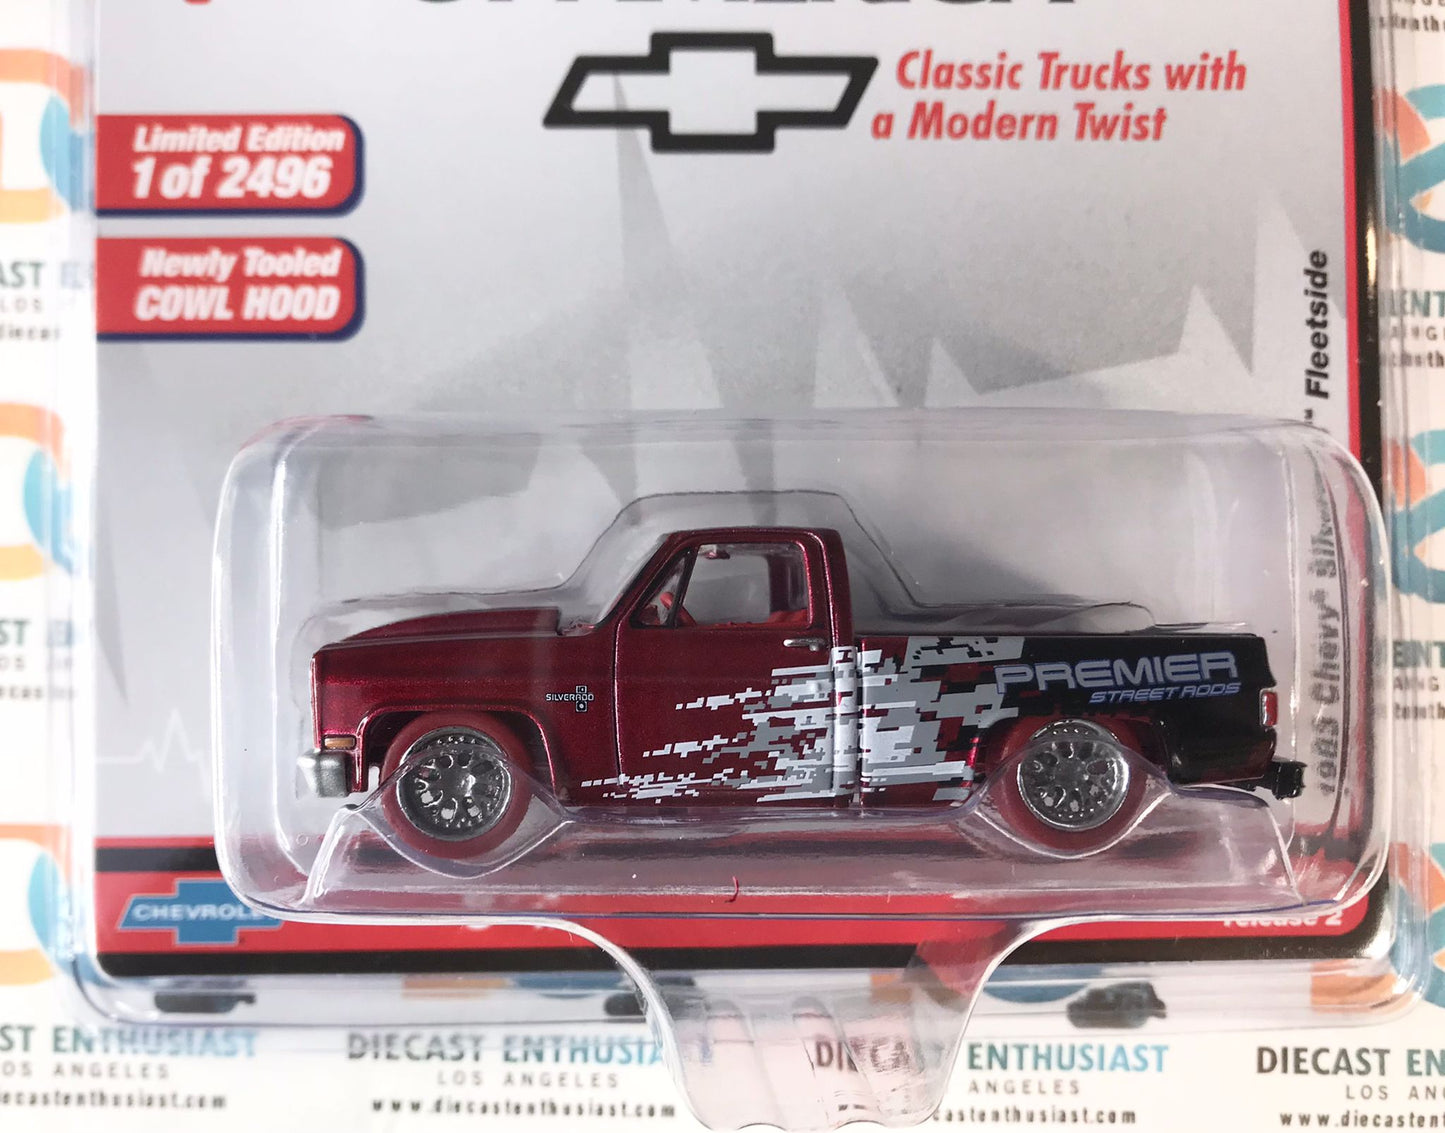 CHASE ULTRA RED Auto World Exclusives The Heartbeat of America 1983 Chevy Silverado Fleetside Blue 1:64